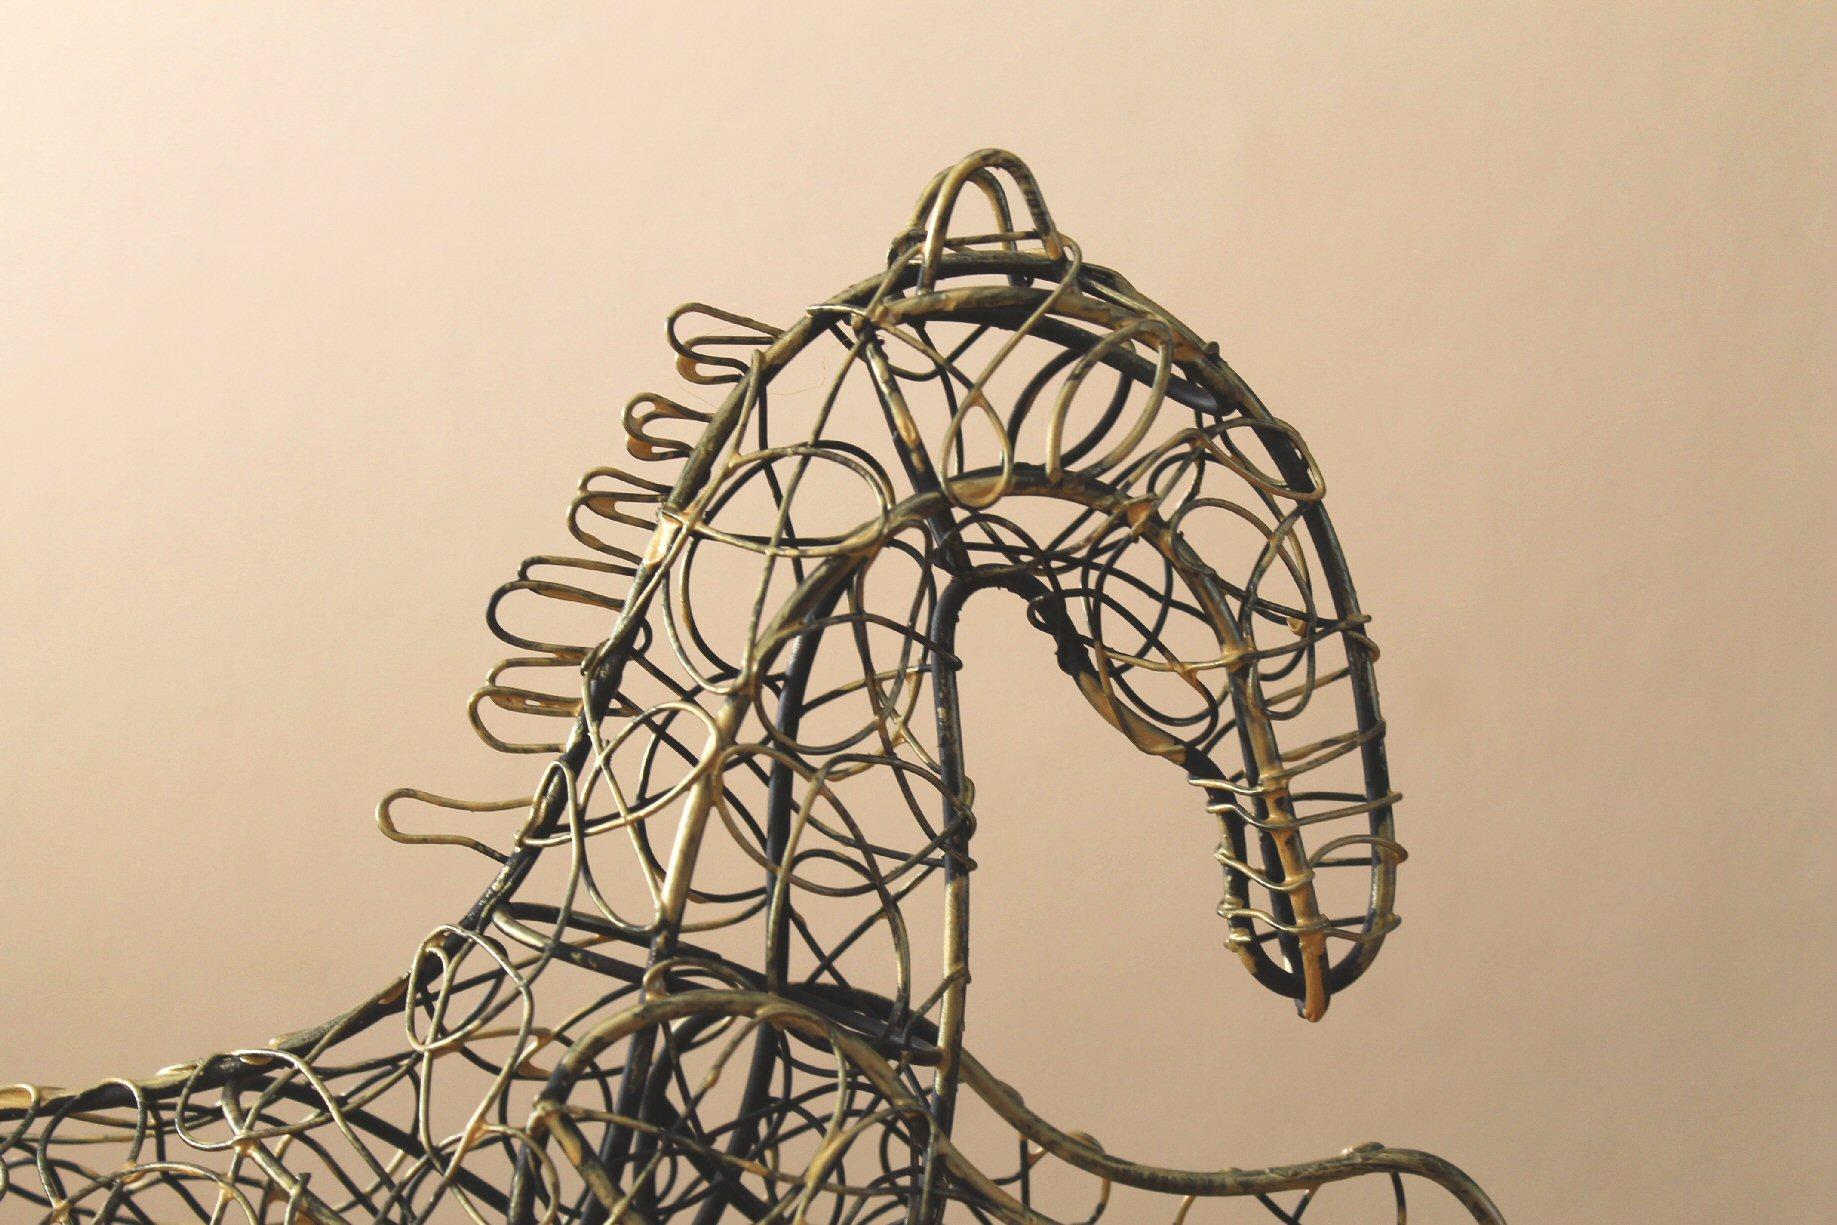 Frederic Weinberg!

Mid Century Modern
Wire Horse Sculpture!
Abstract Art!

Striking polychromed wire finish!

Dimensions: 13